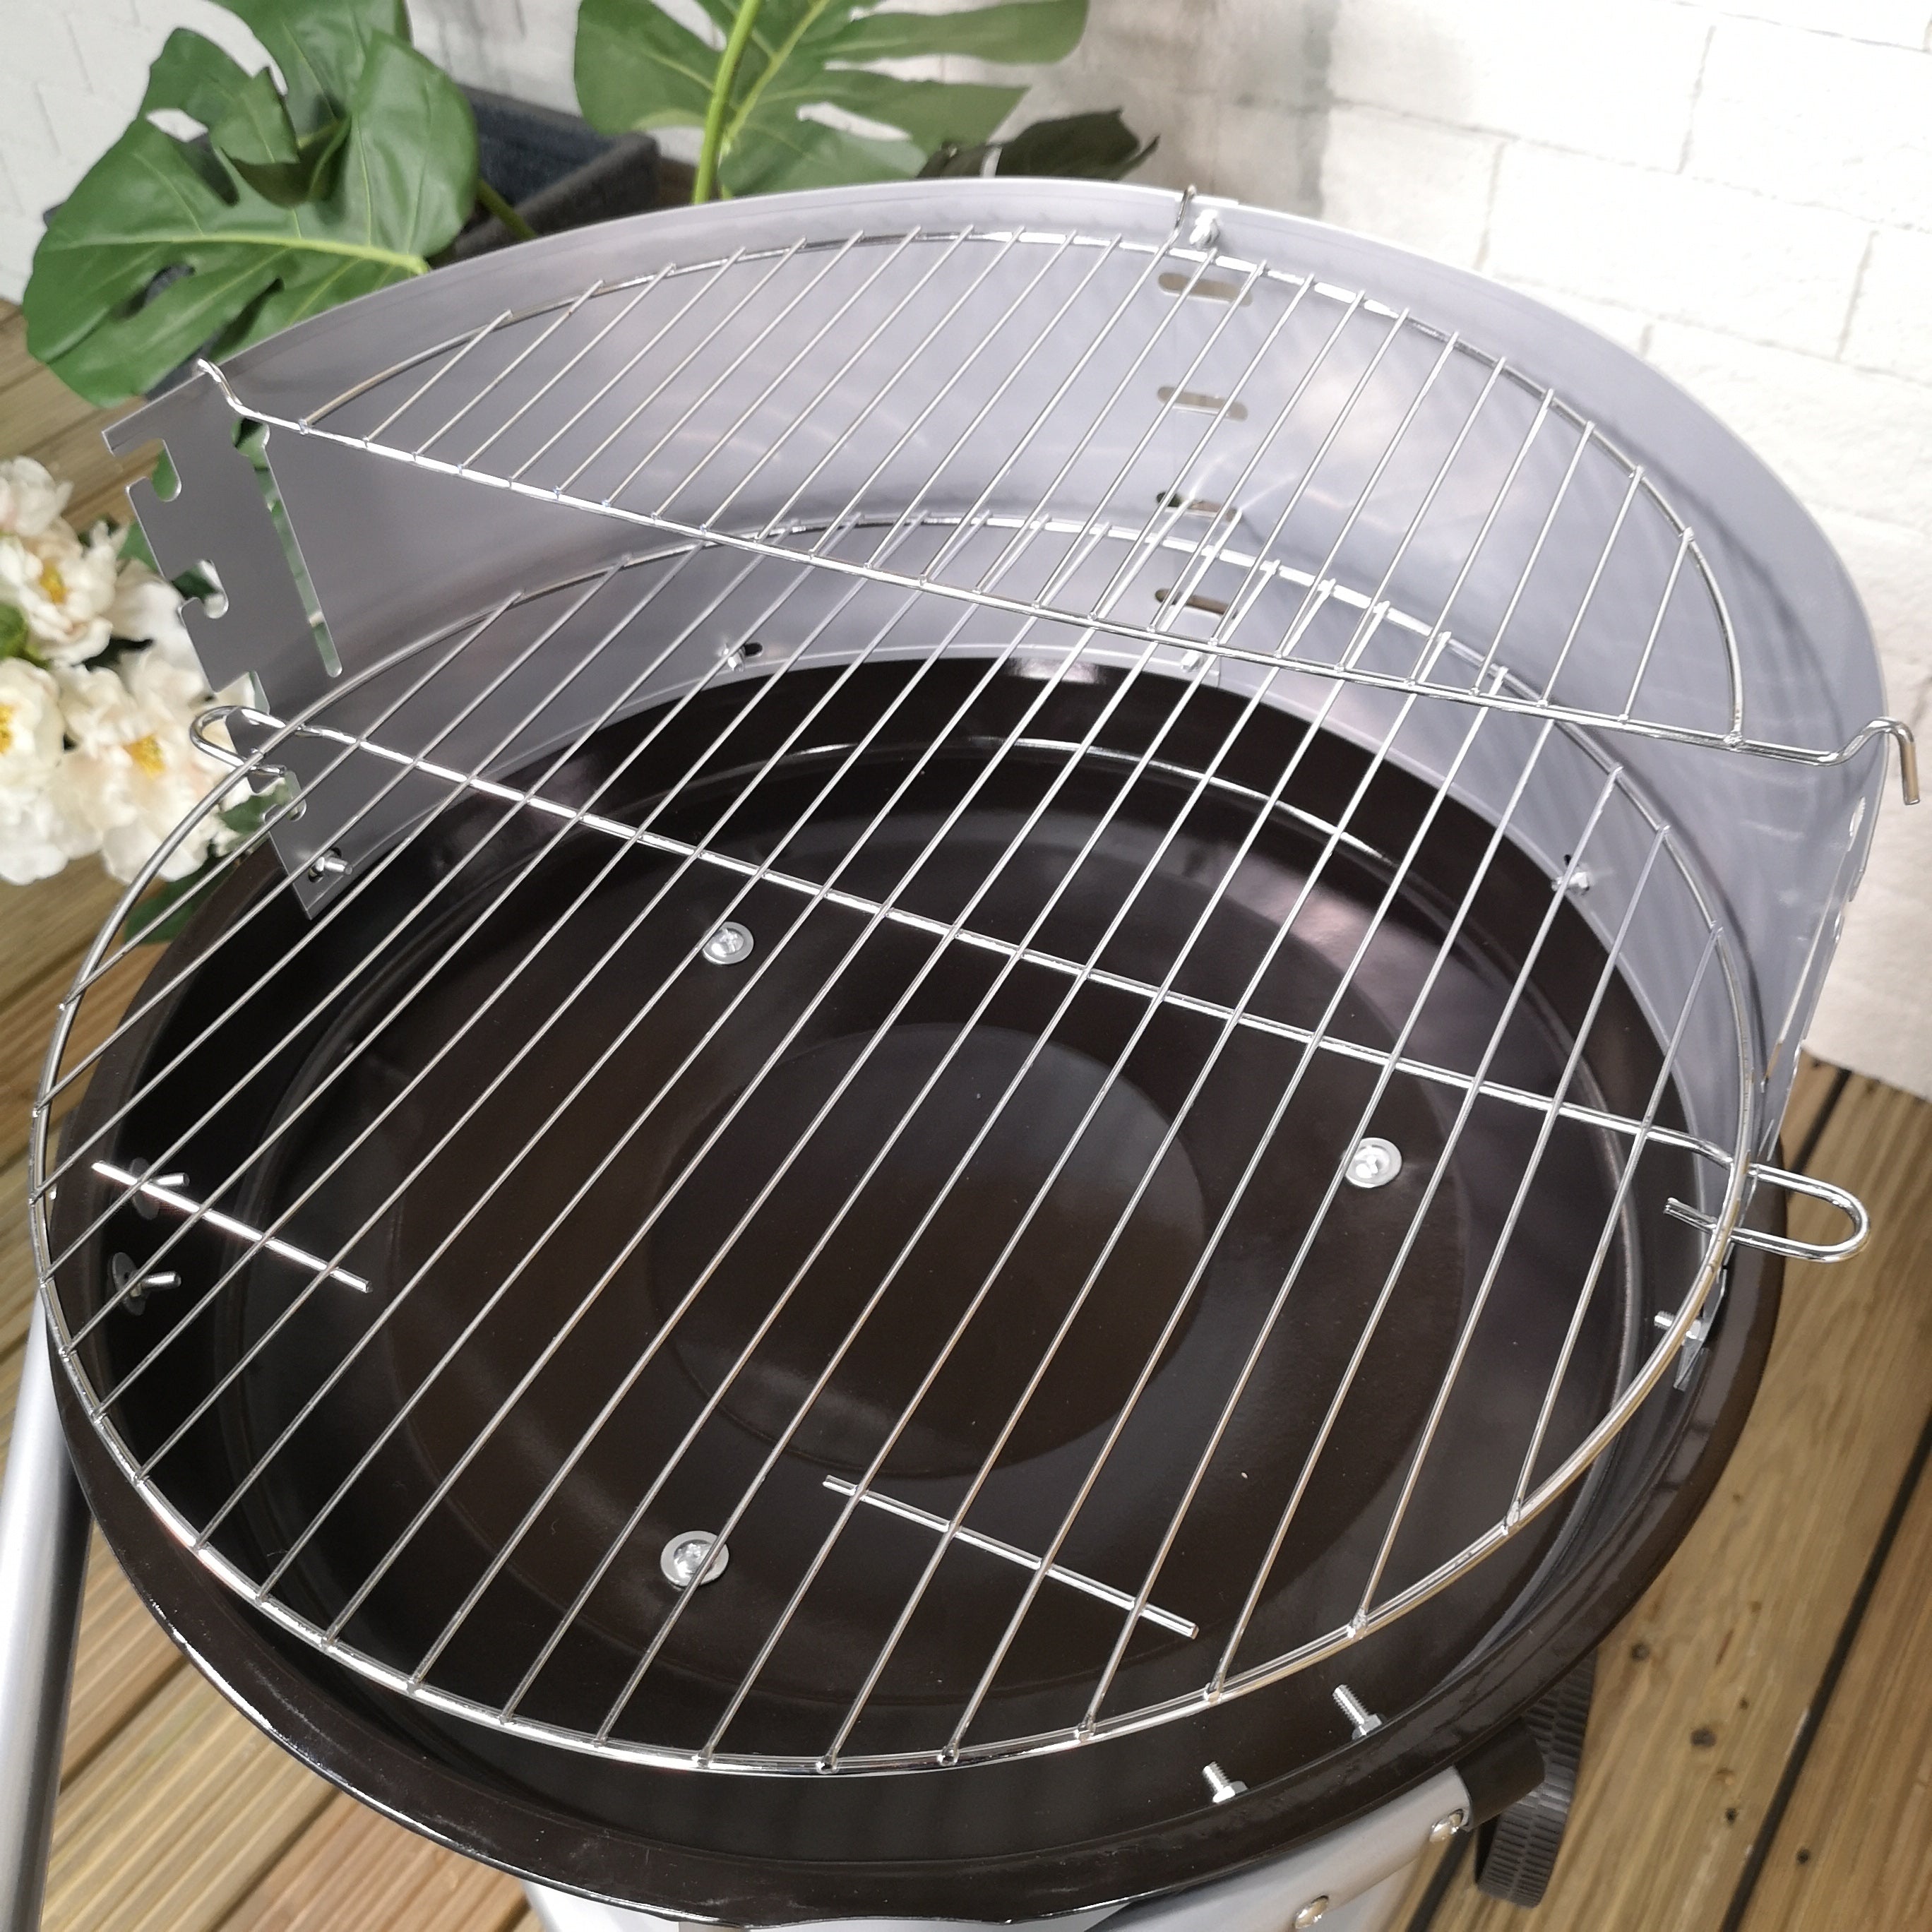 47cm Round Garden Charcoal Barbecue/BBQ with wheels 